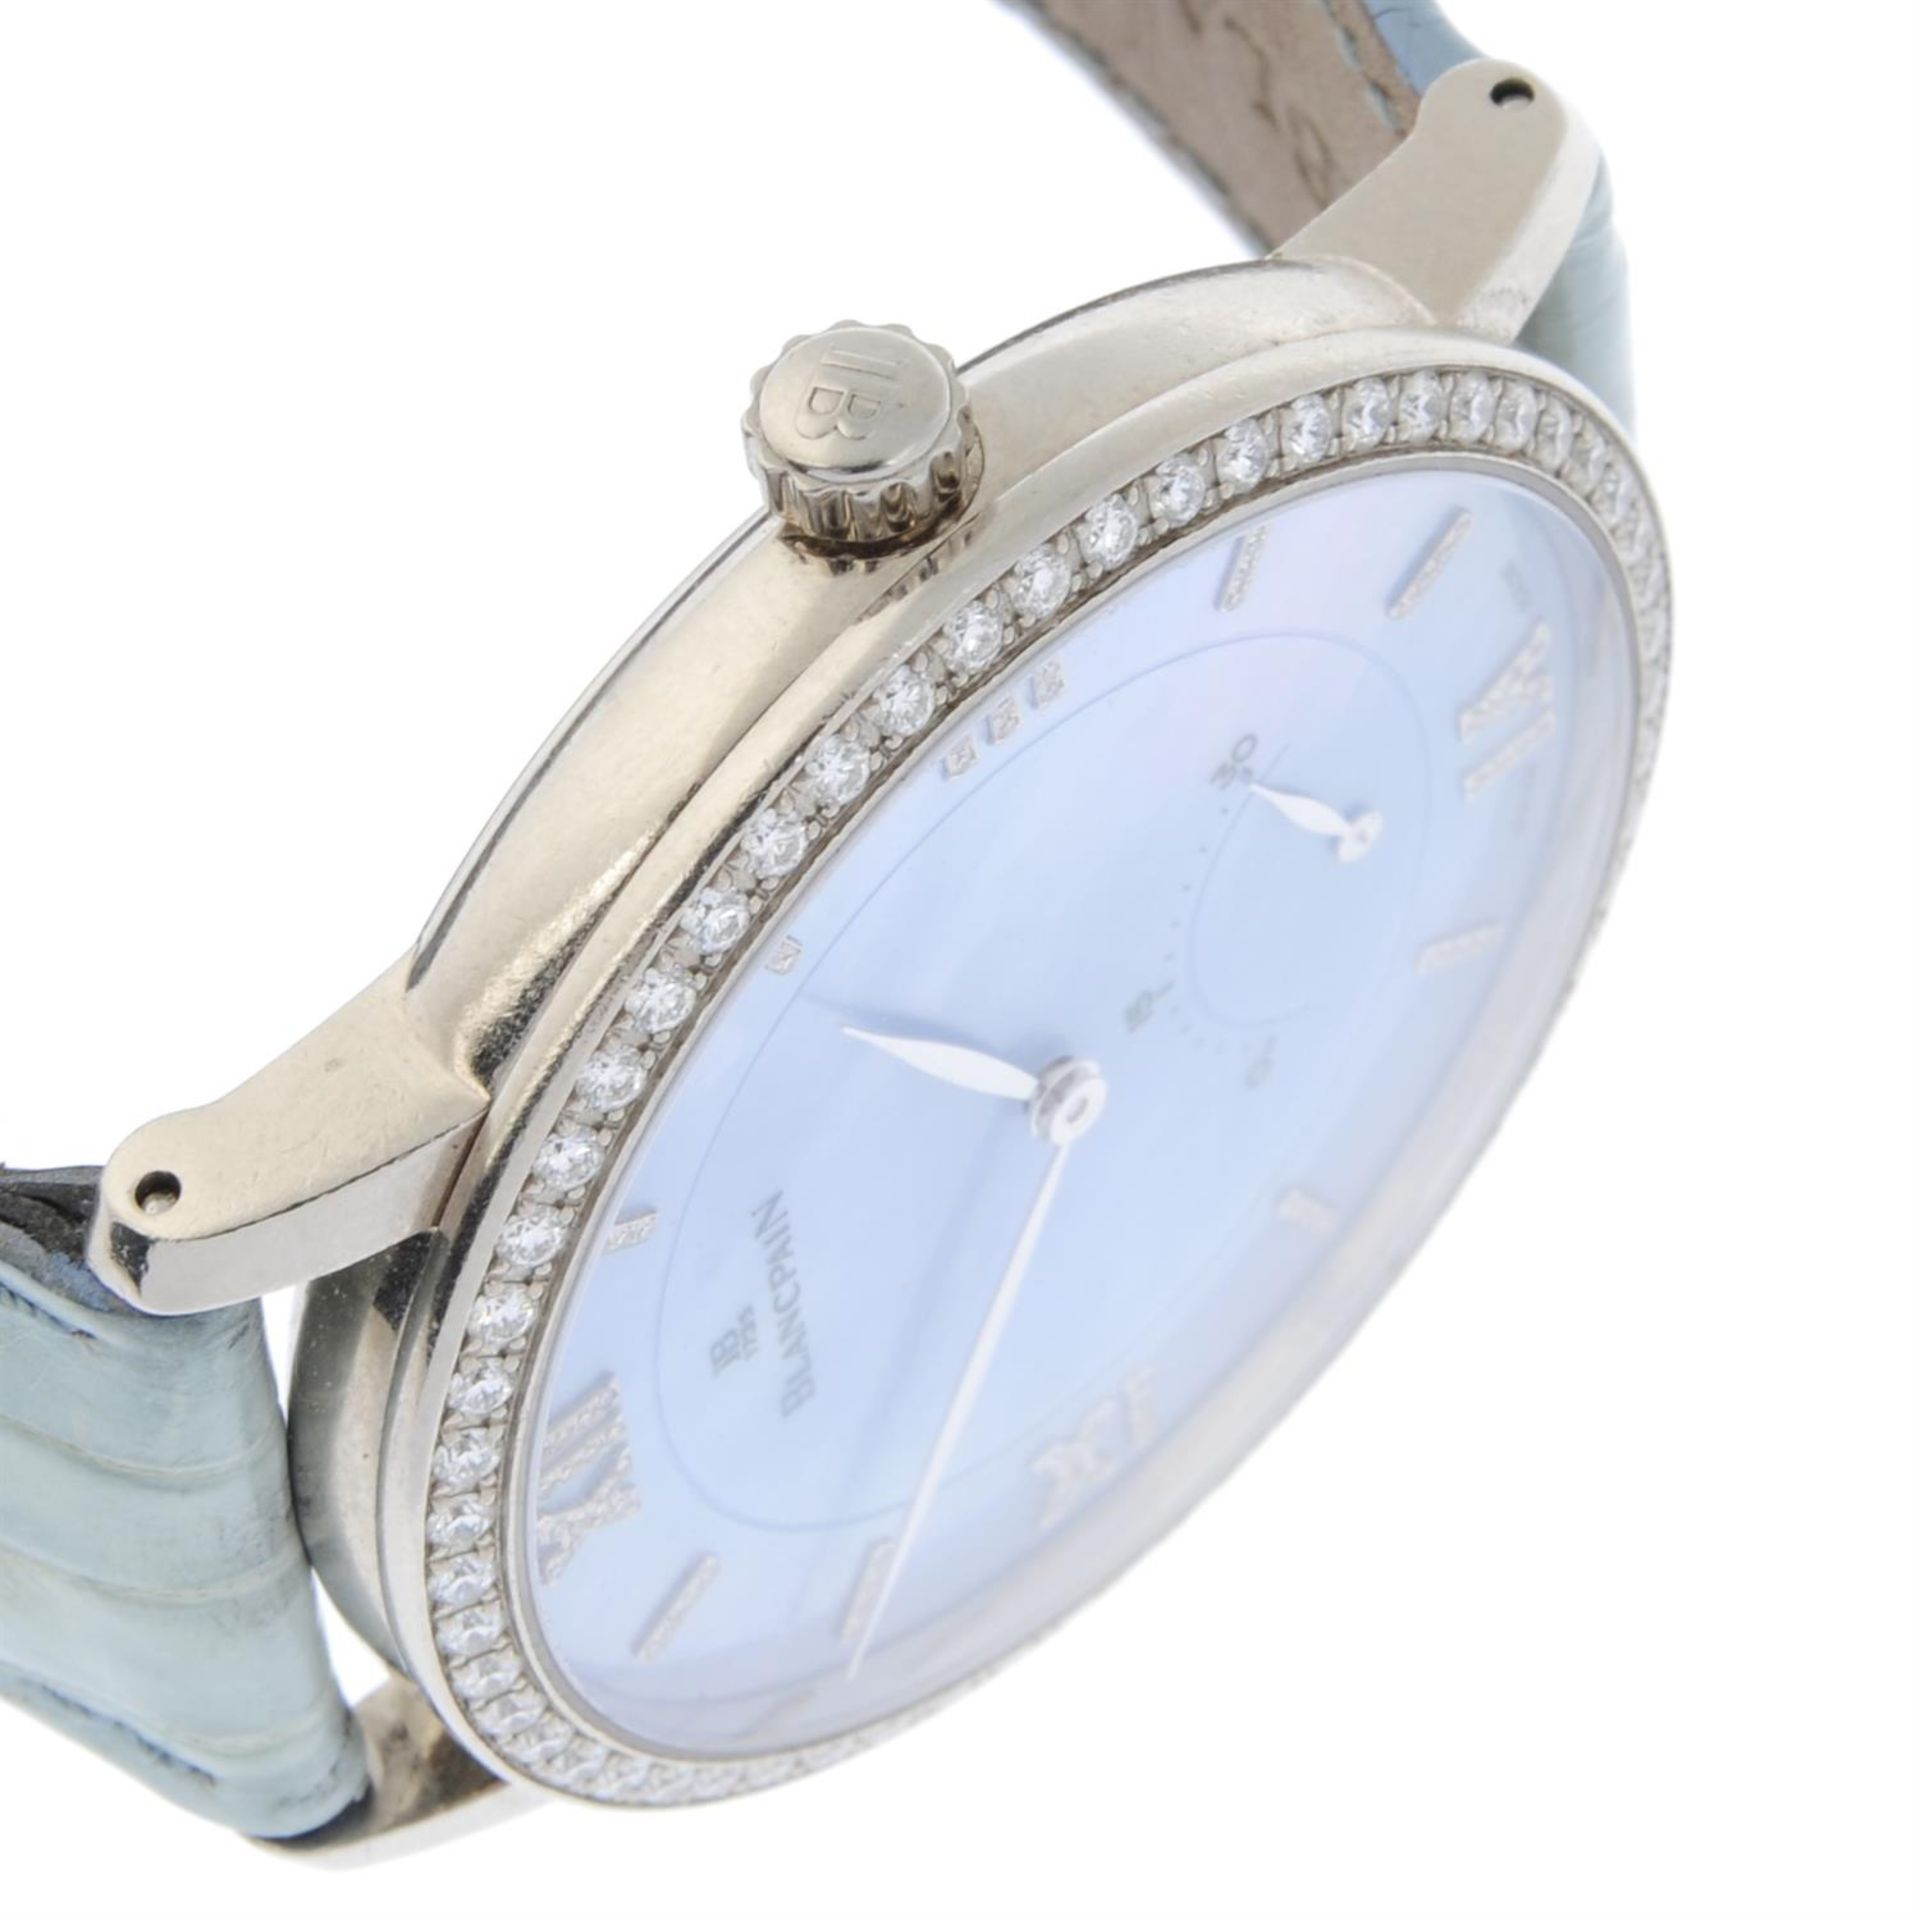 BLANCPAIN - an 18ct white gold Villeret wrist watch, 40mm. - Image 3 of 7